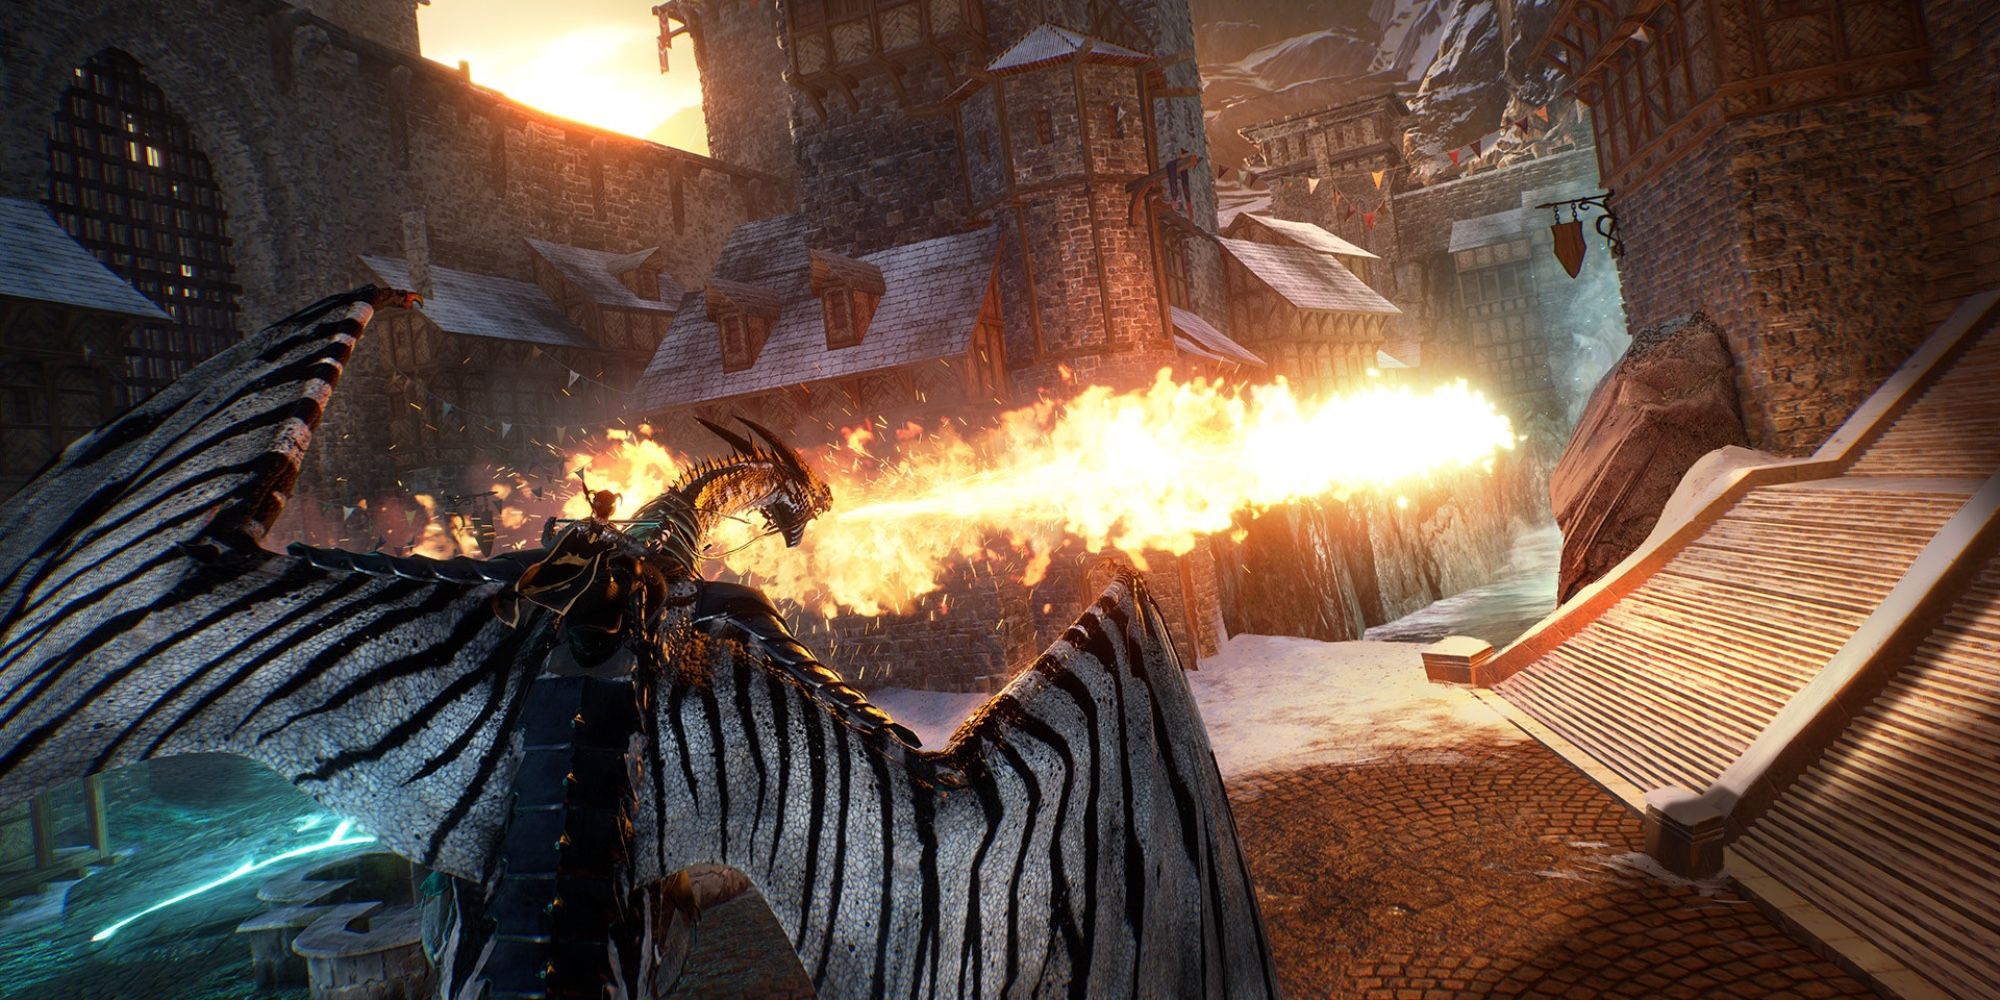 Free-to-play Games - Century - Age of Ashes - Player mounts dragon that breathes fire on building